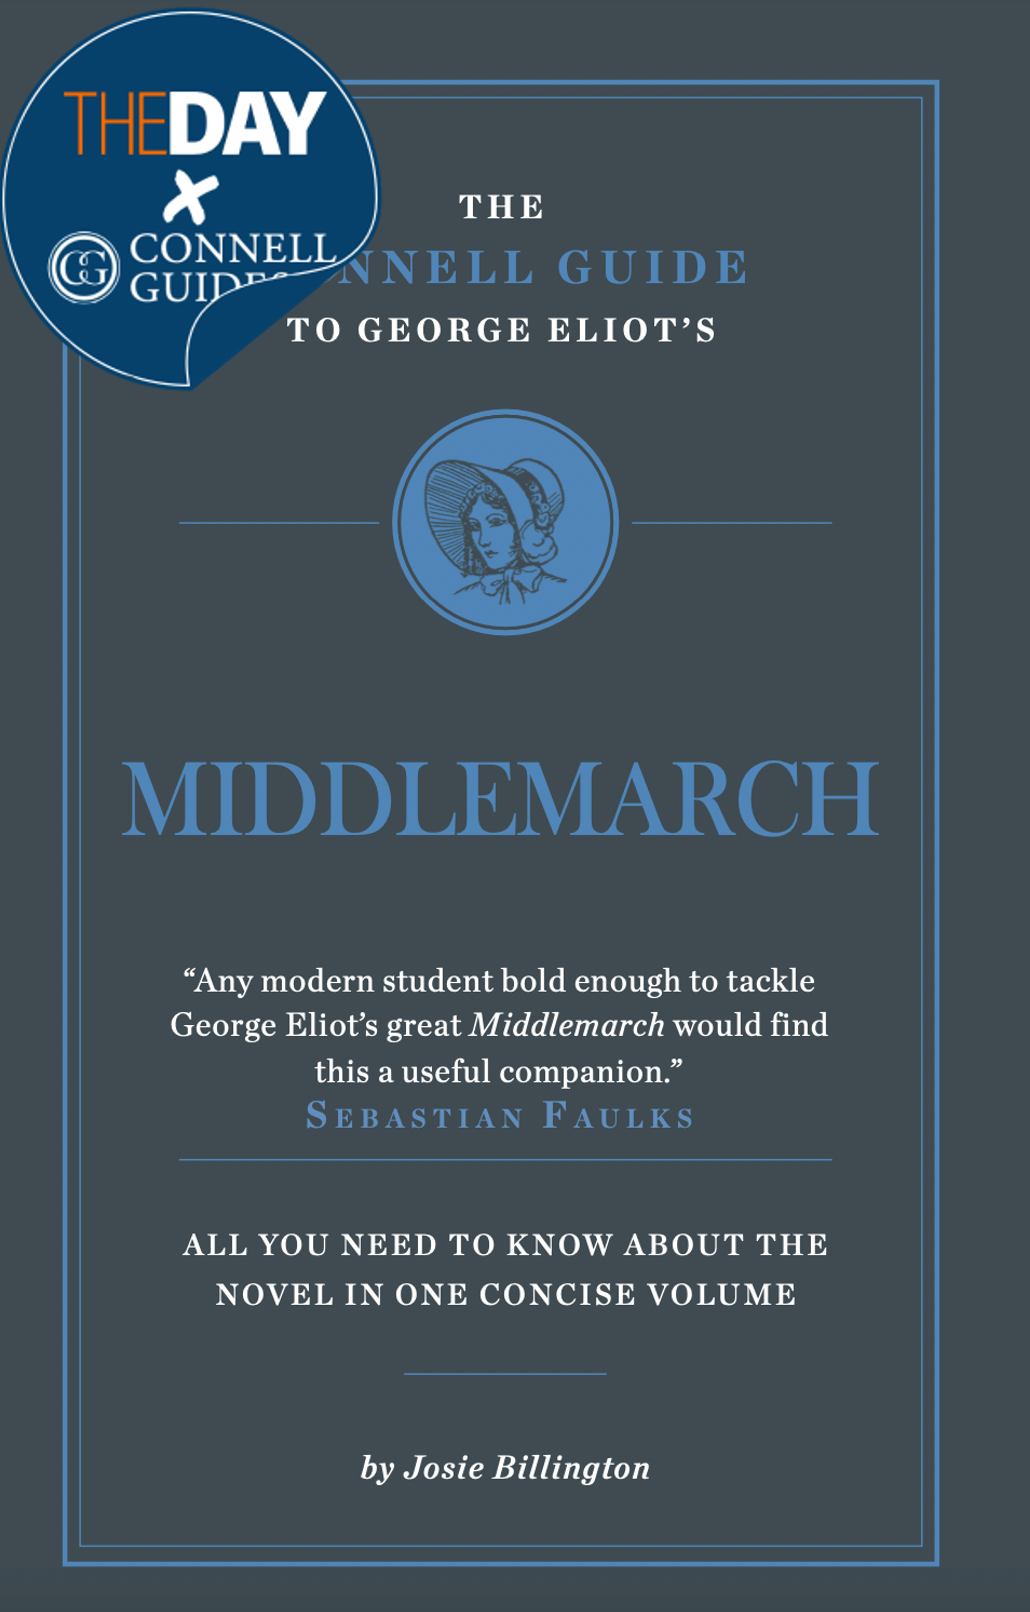 The Day x Connell Guides - The Connell Guide to George Eliot's Middlemarch